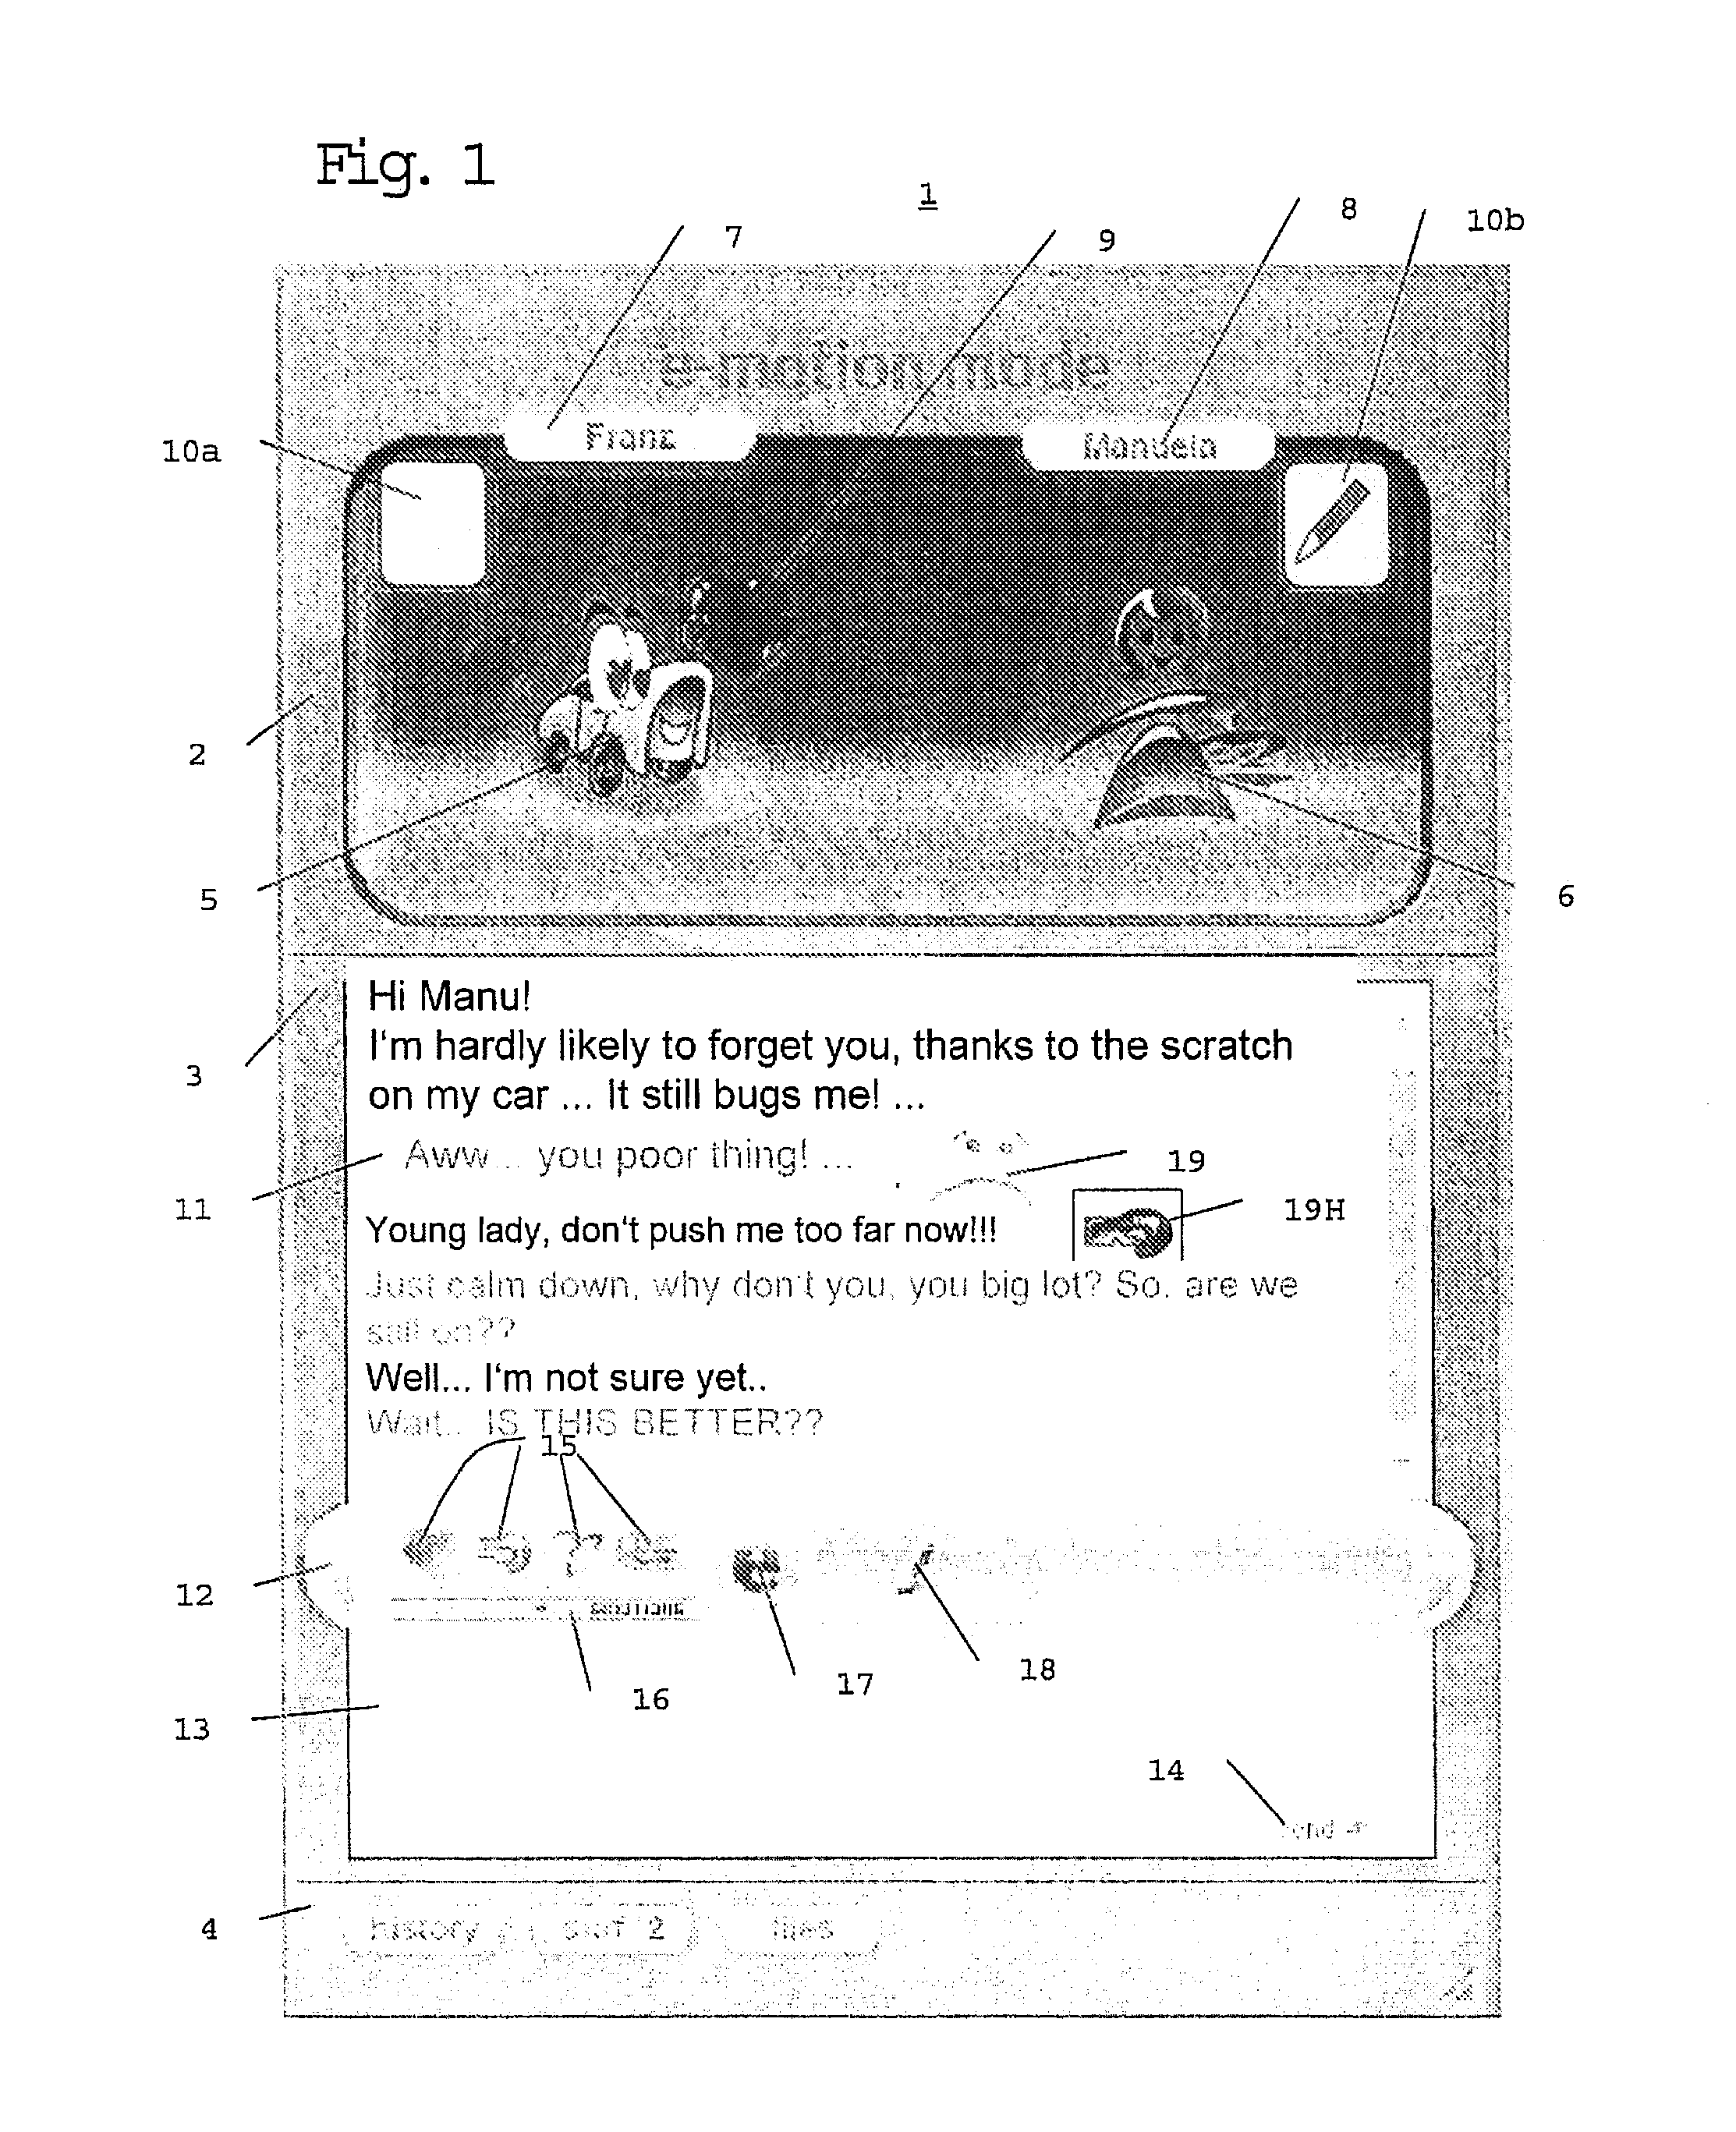 Method and System for Telecommunication with the Aid of Virtual Control Representatives